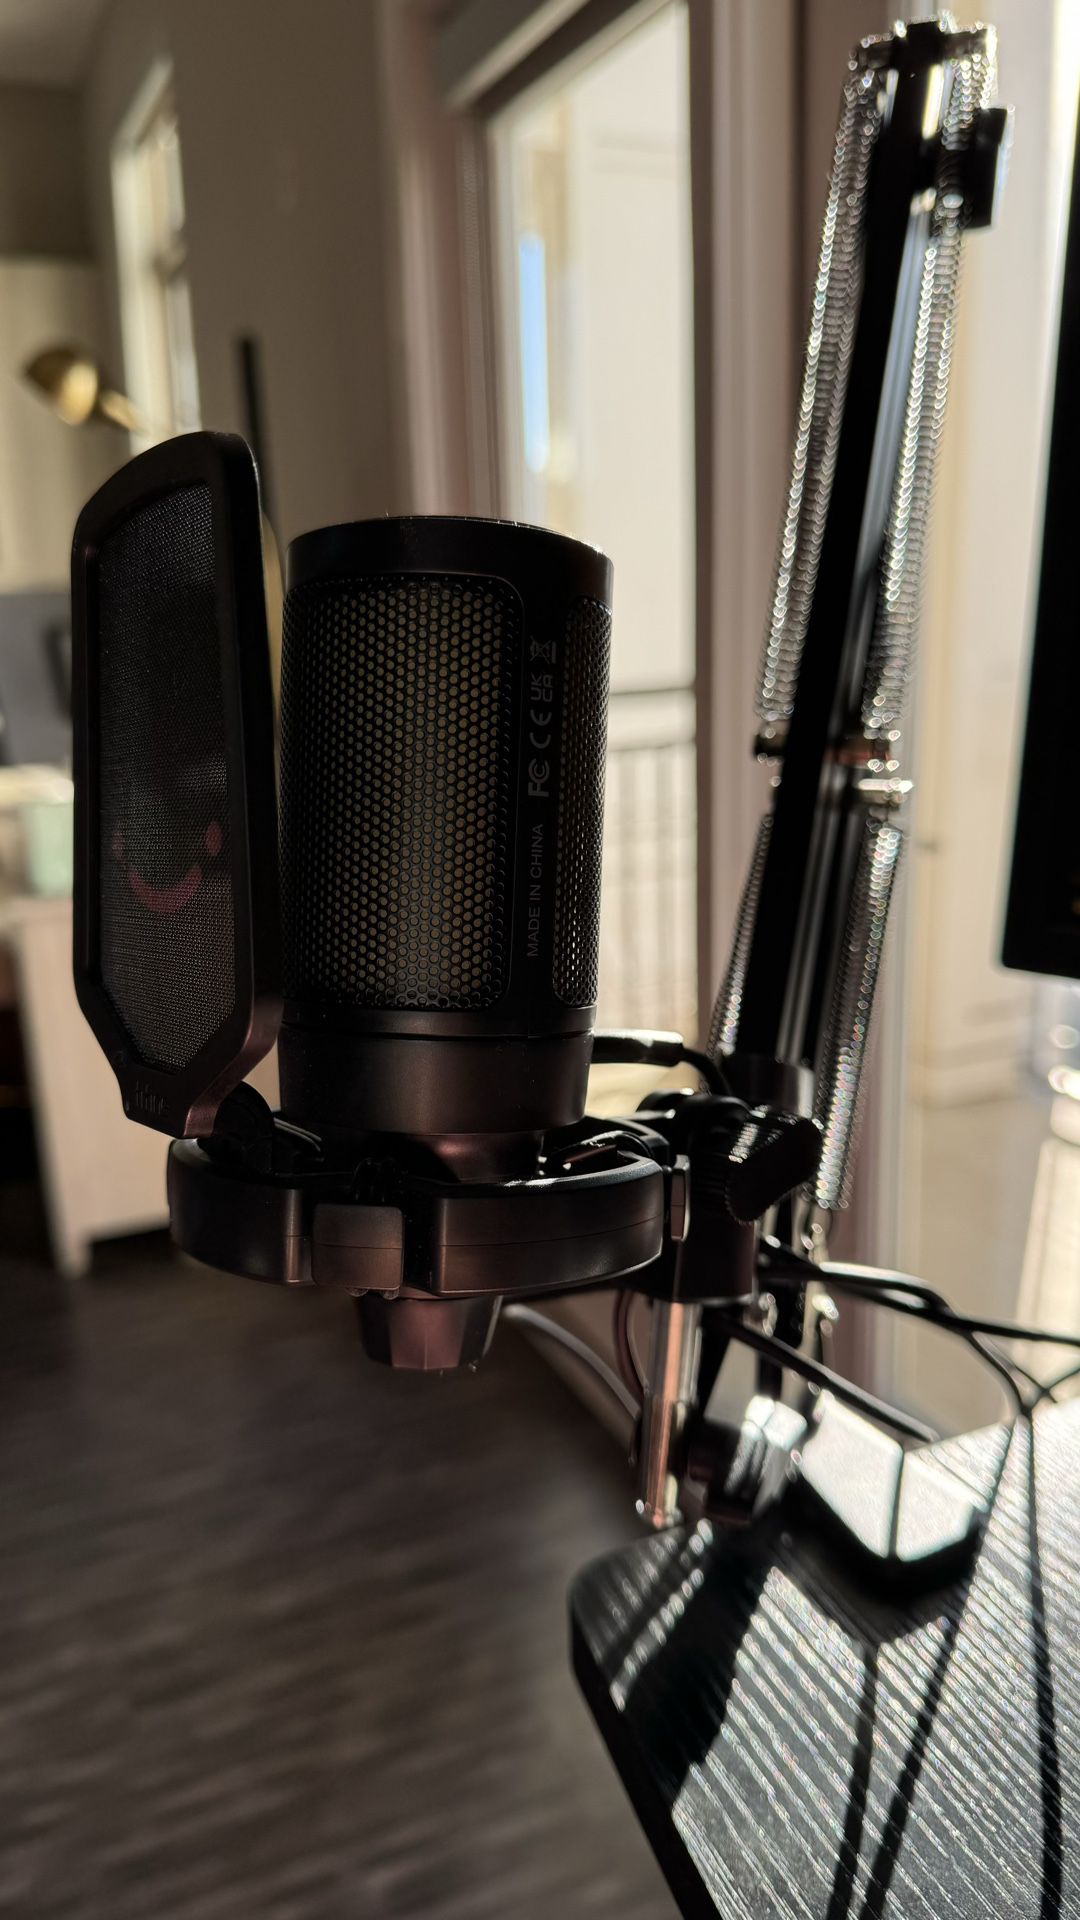 Microphone For Gaming, Meetings, Or Podcasting